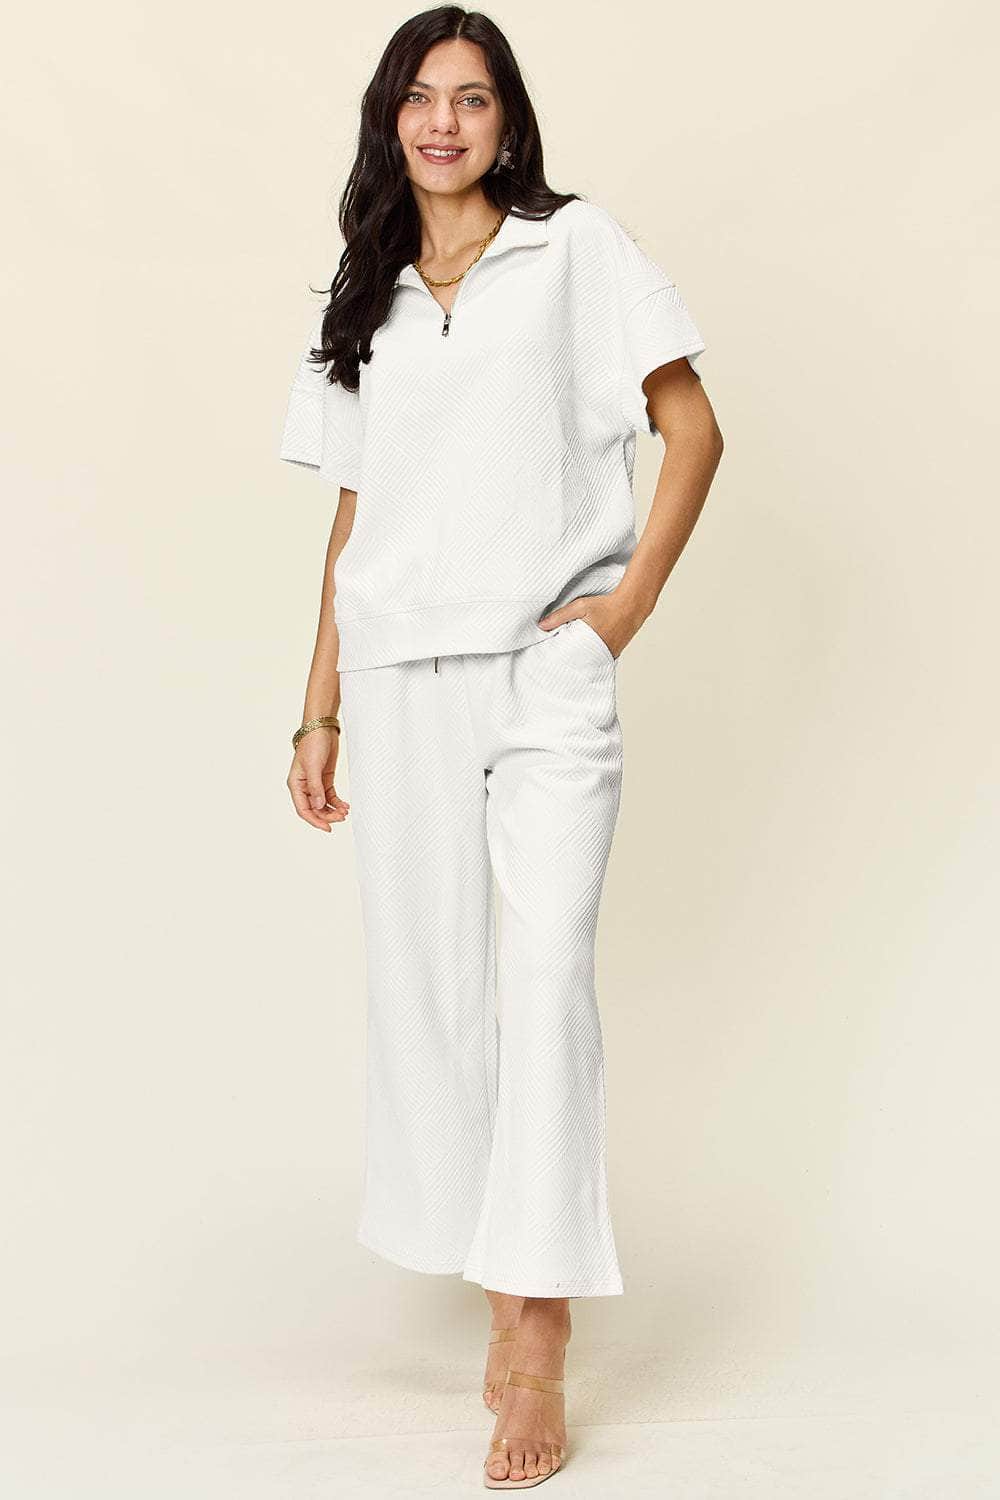 Double Take Full Size Texture Half Zip Short Sleeve Top and Pants Set White / S